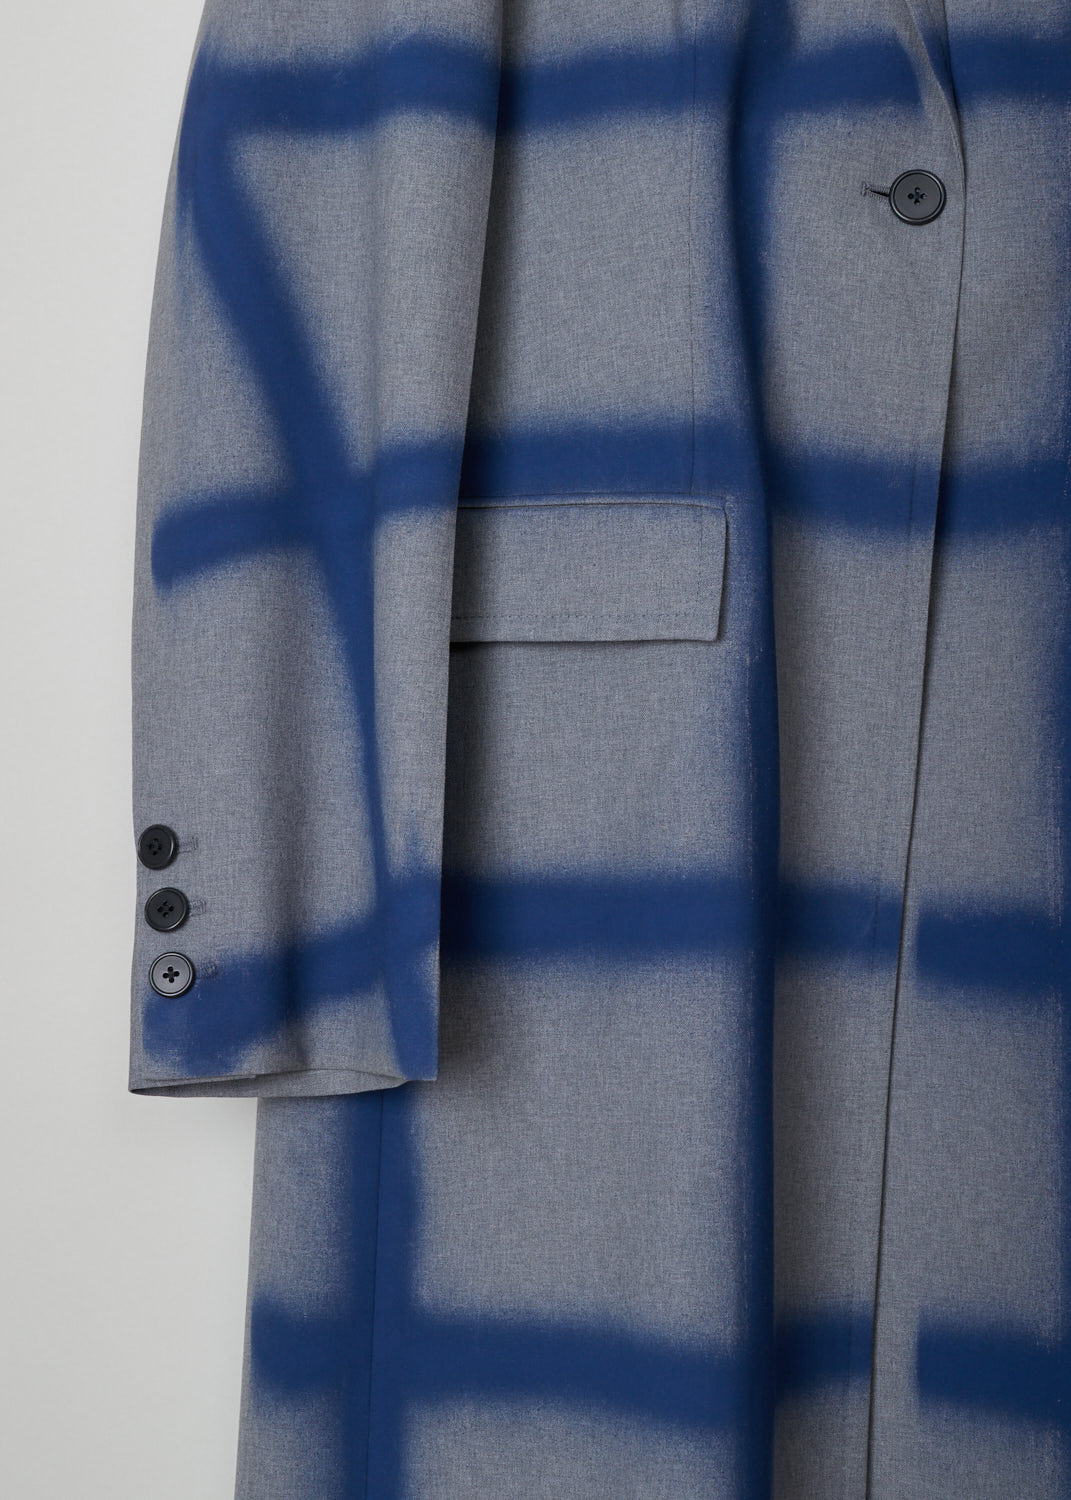 Marni, Checkered overcoat in grey and blue, CPMA0145U6_USCR90_SCB65, blue grey, detail1, Knee-long overcoat featuring a blue checkered design on a grey background. The collar that leads into the notched lapel, going further down you will find a single buttoned fastening option. Comes long sleeves supporting three buttons. Furthermore the back of this model is left monotone to emphasize the front. Two flap pockets can be found on the front. 